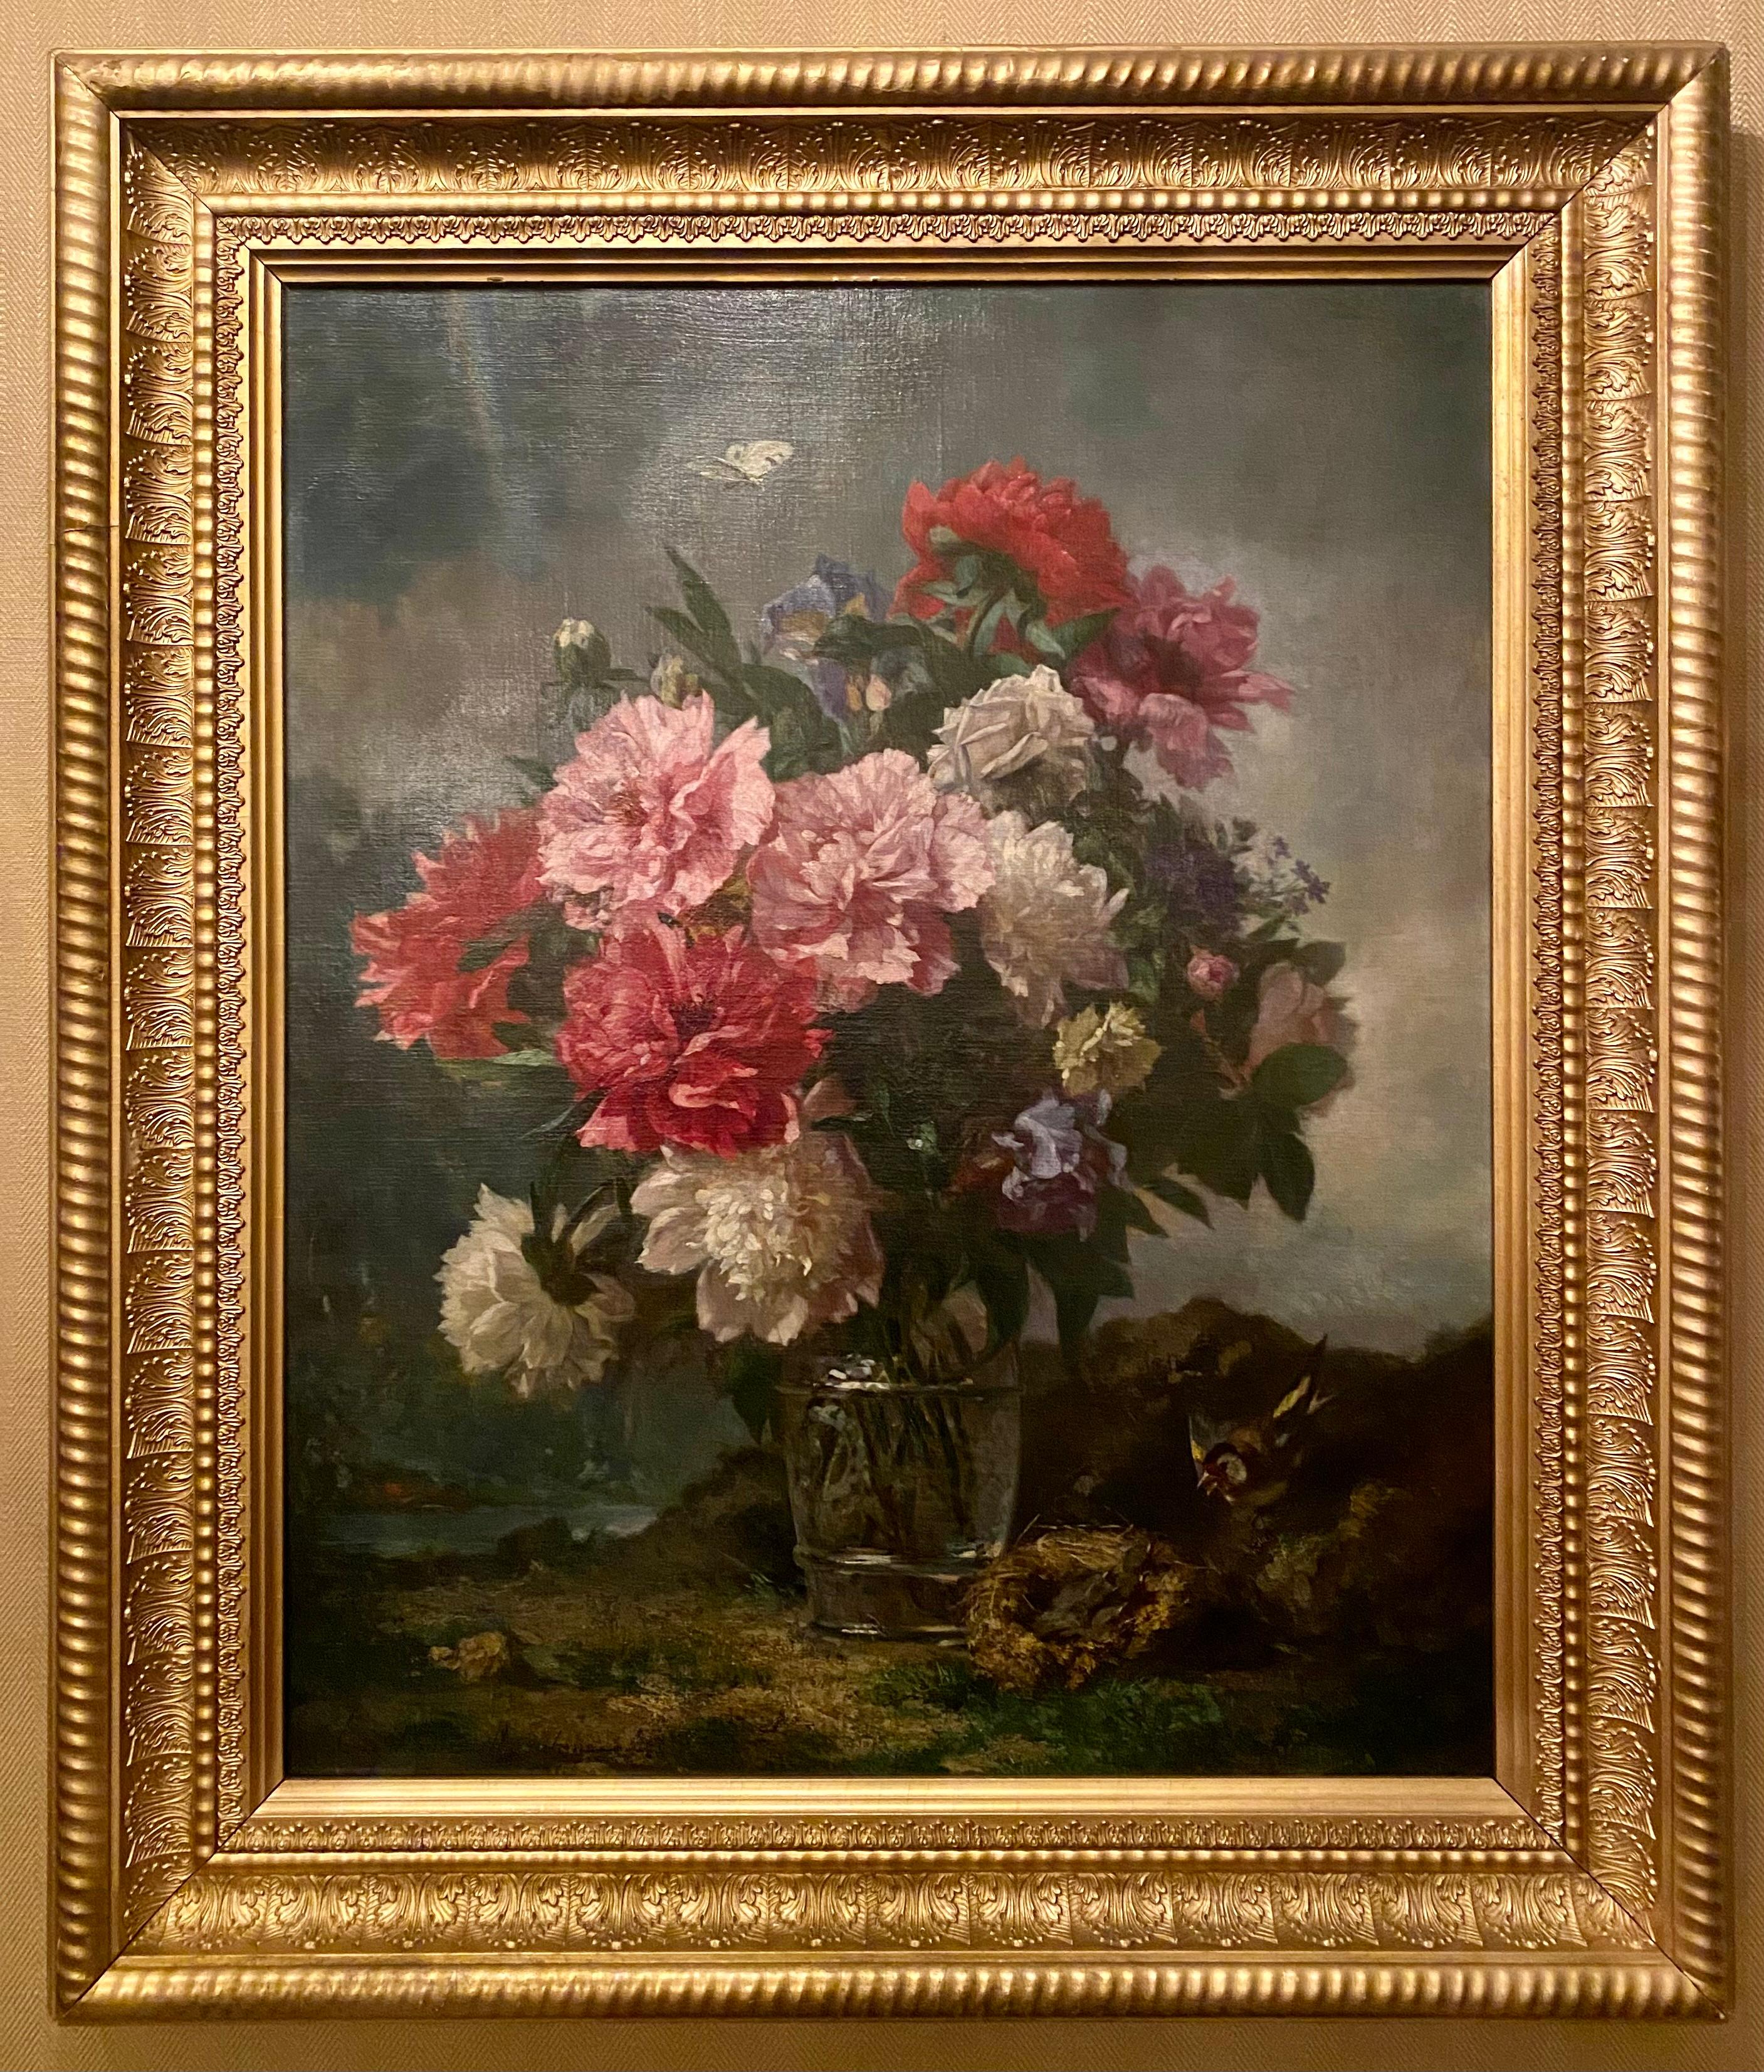 Pair antique French floral still-life oil on Canvas paintings by Euphémie Muraton (b. 1836-1914). Exceptional artist; debuted at the Paris Salon in 1863 and L'Exposition Universelle in 1889. Her work is represented in a number of French museums,